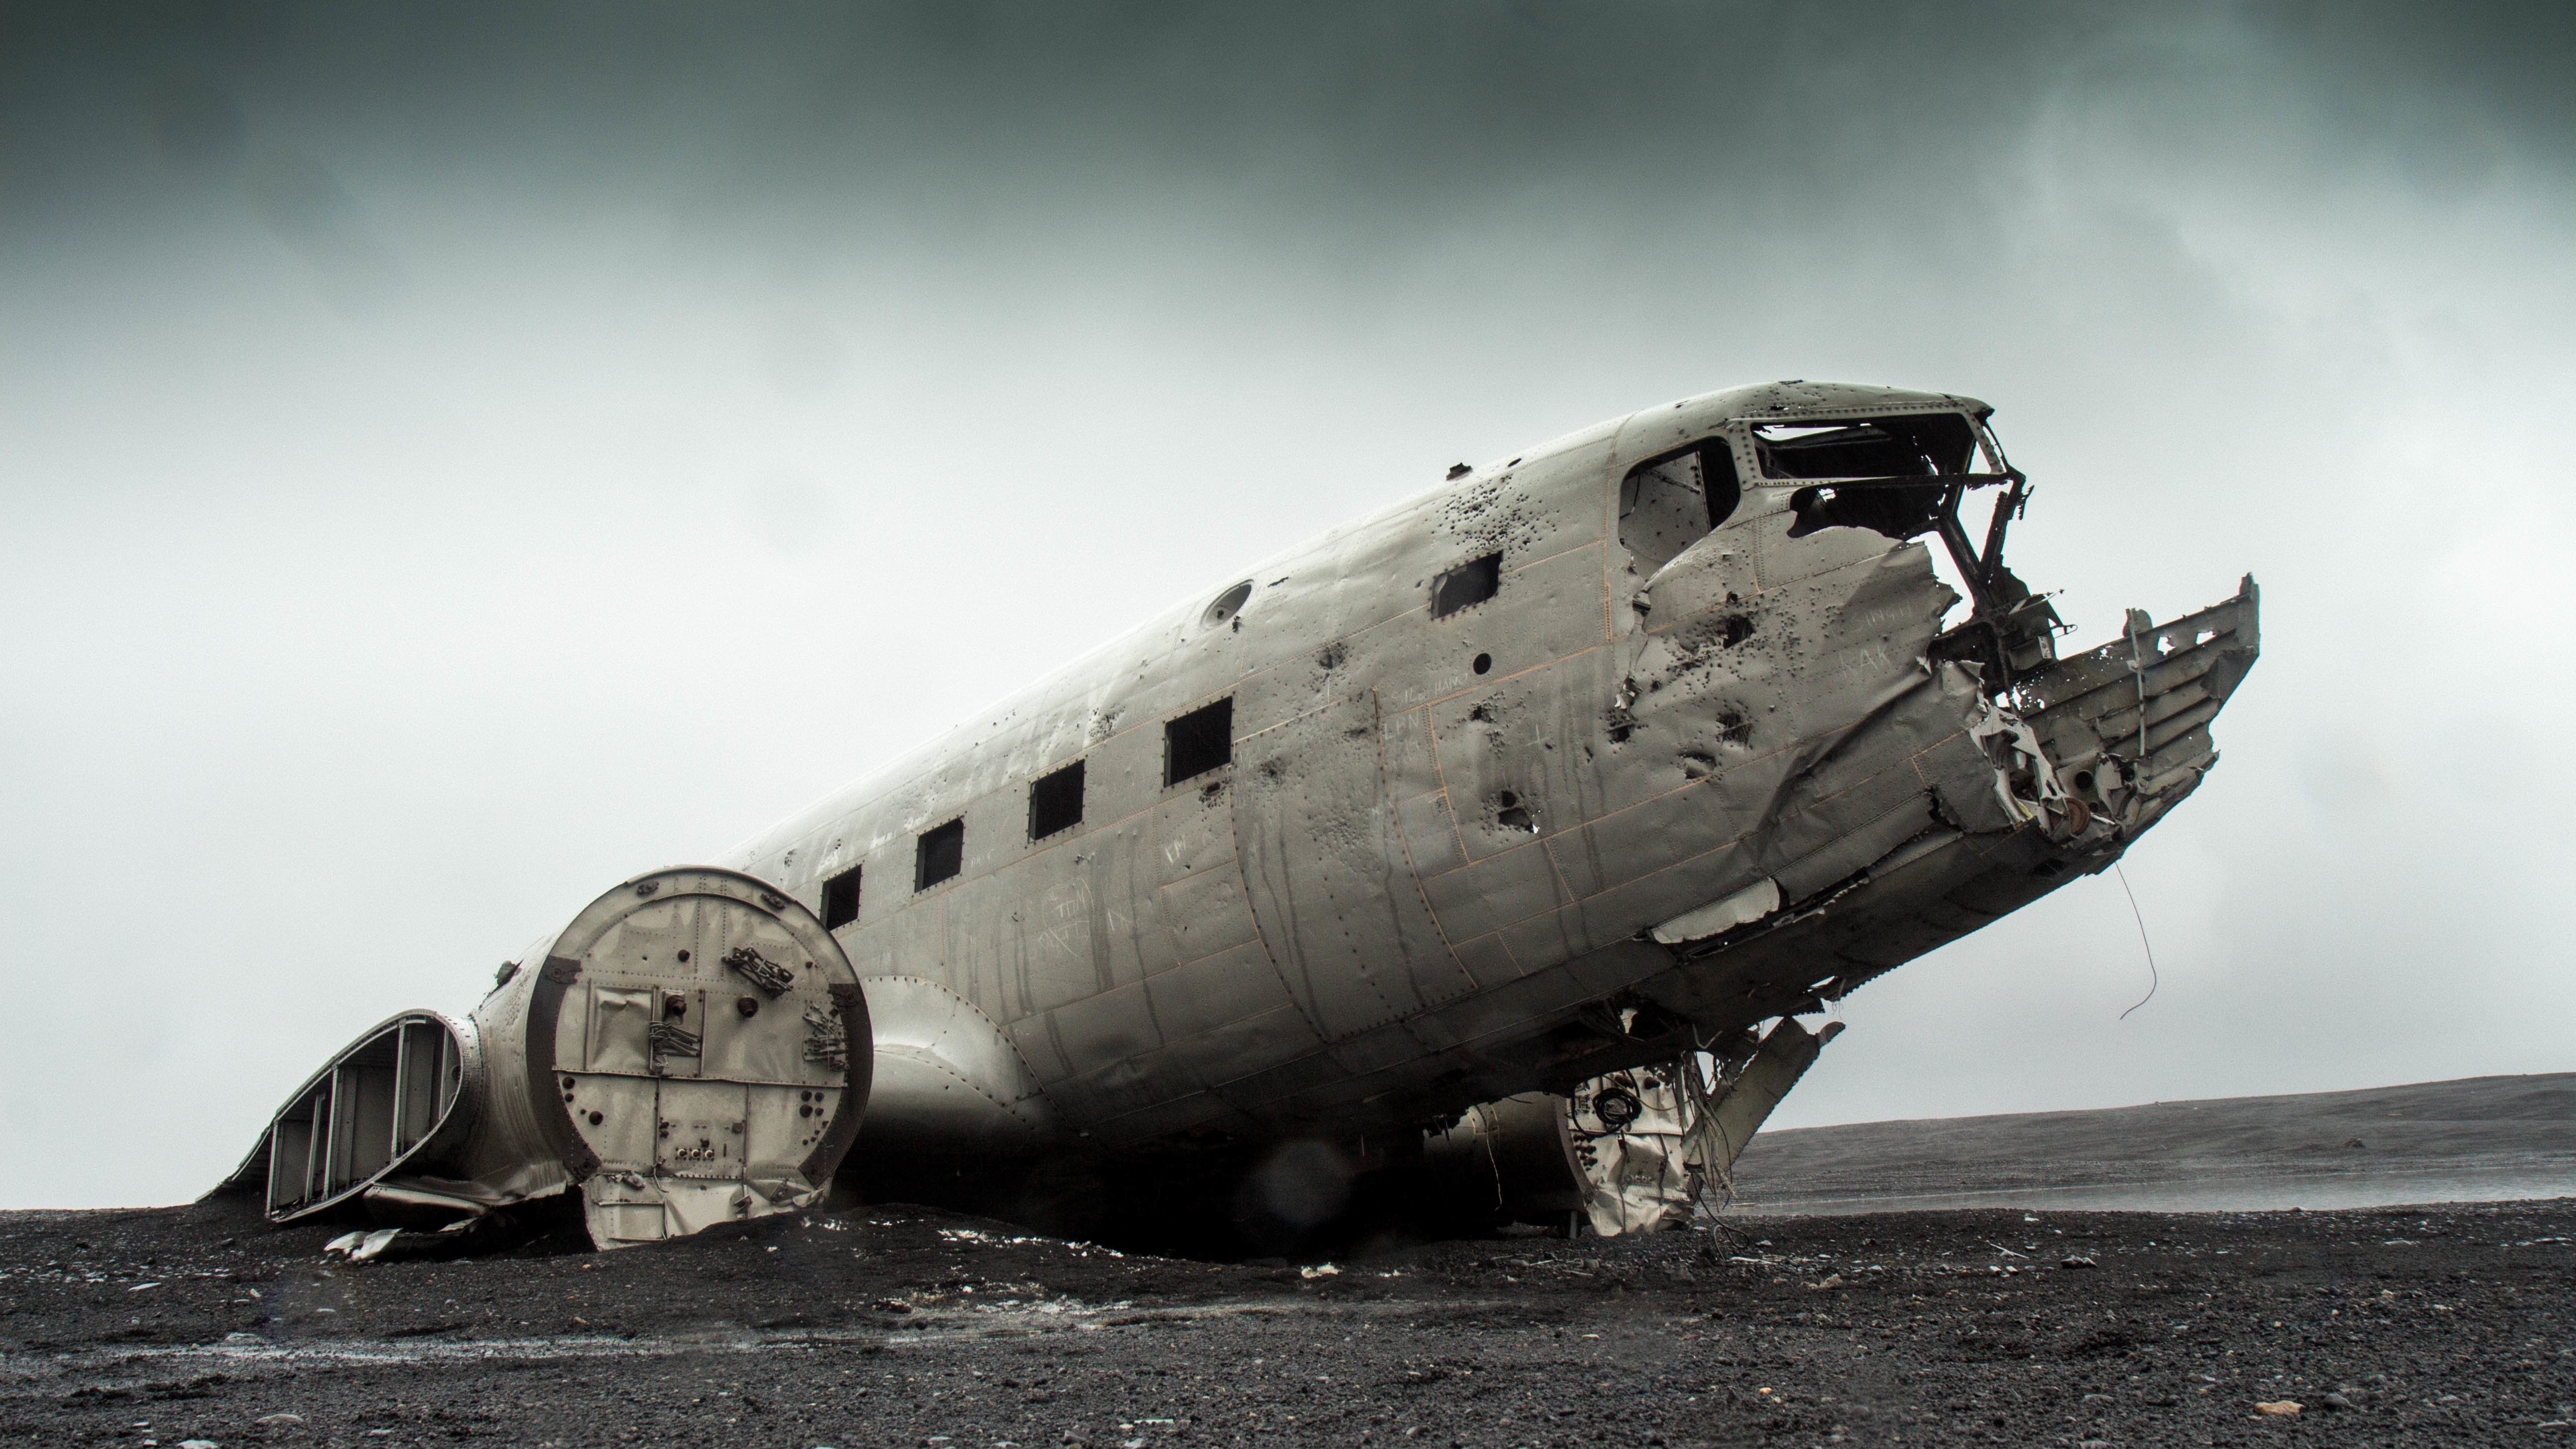 General 5184x2916 photography airplane wreck overcast military vehicle vehicle aircraft